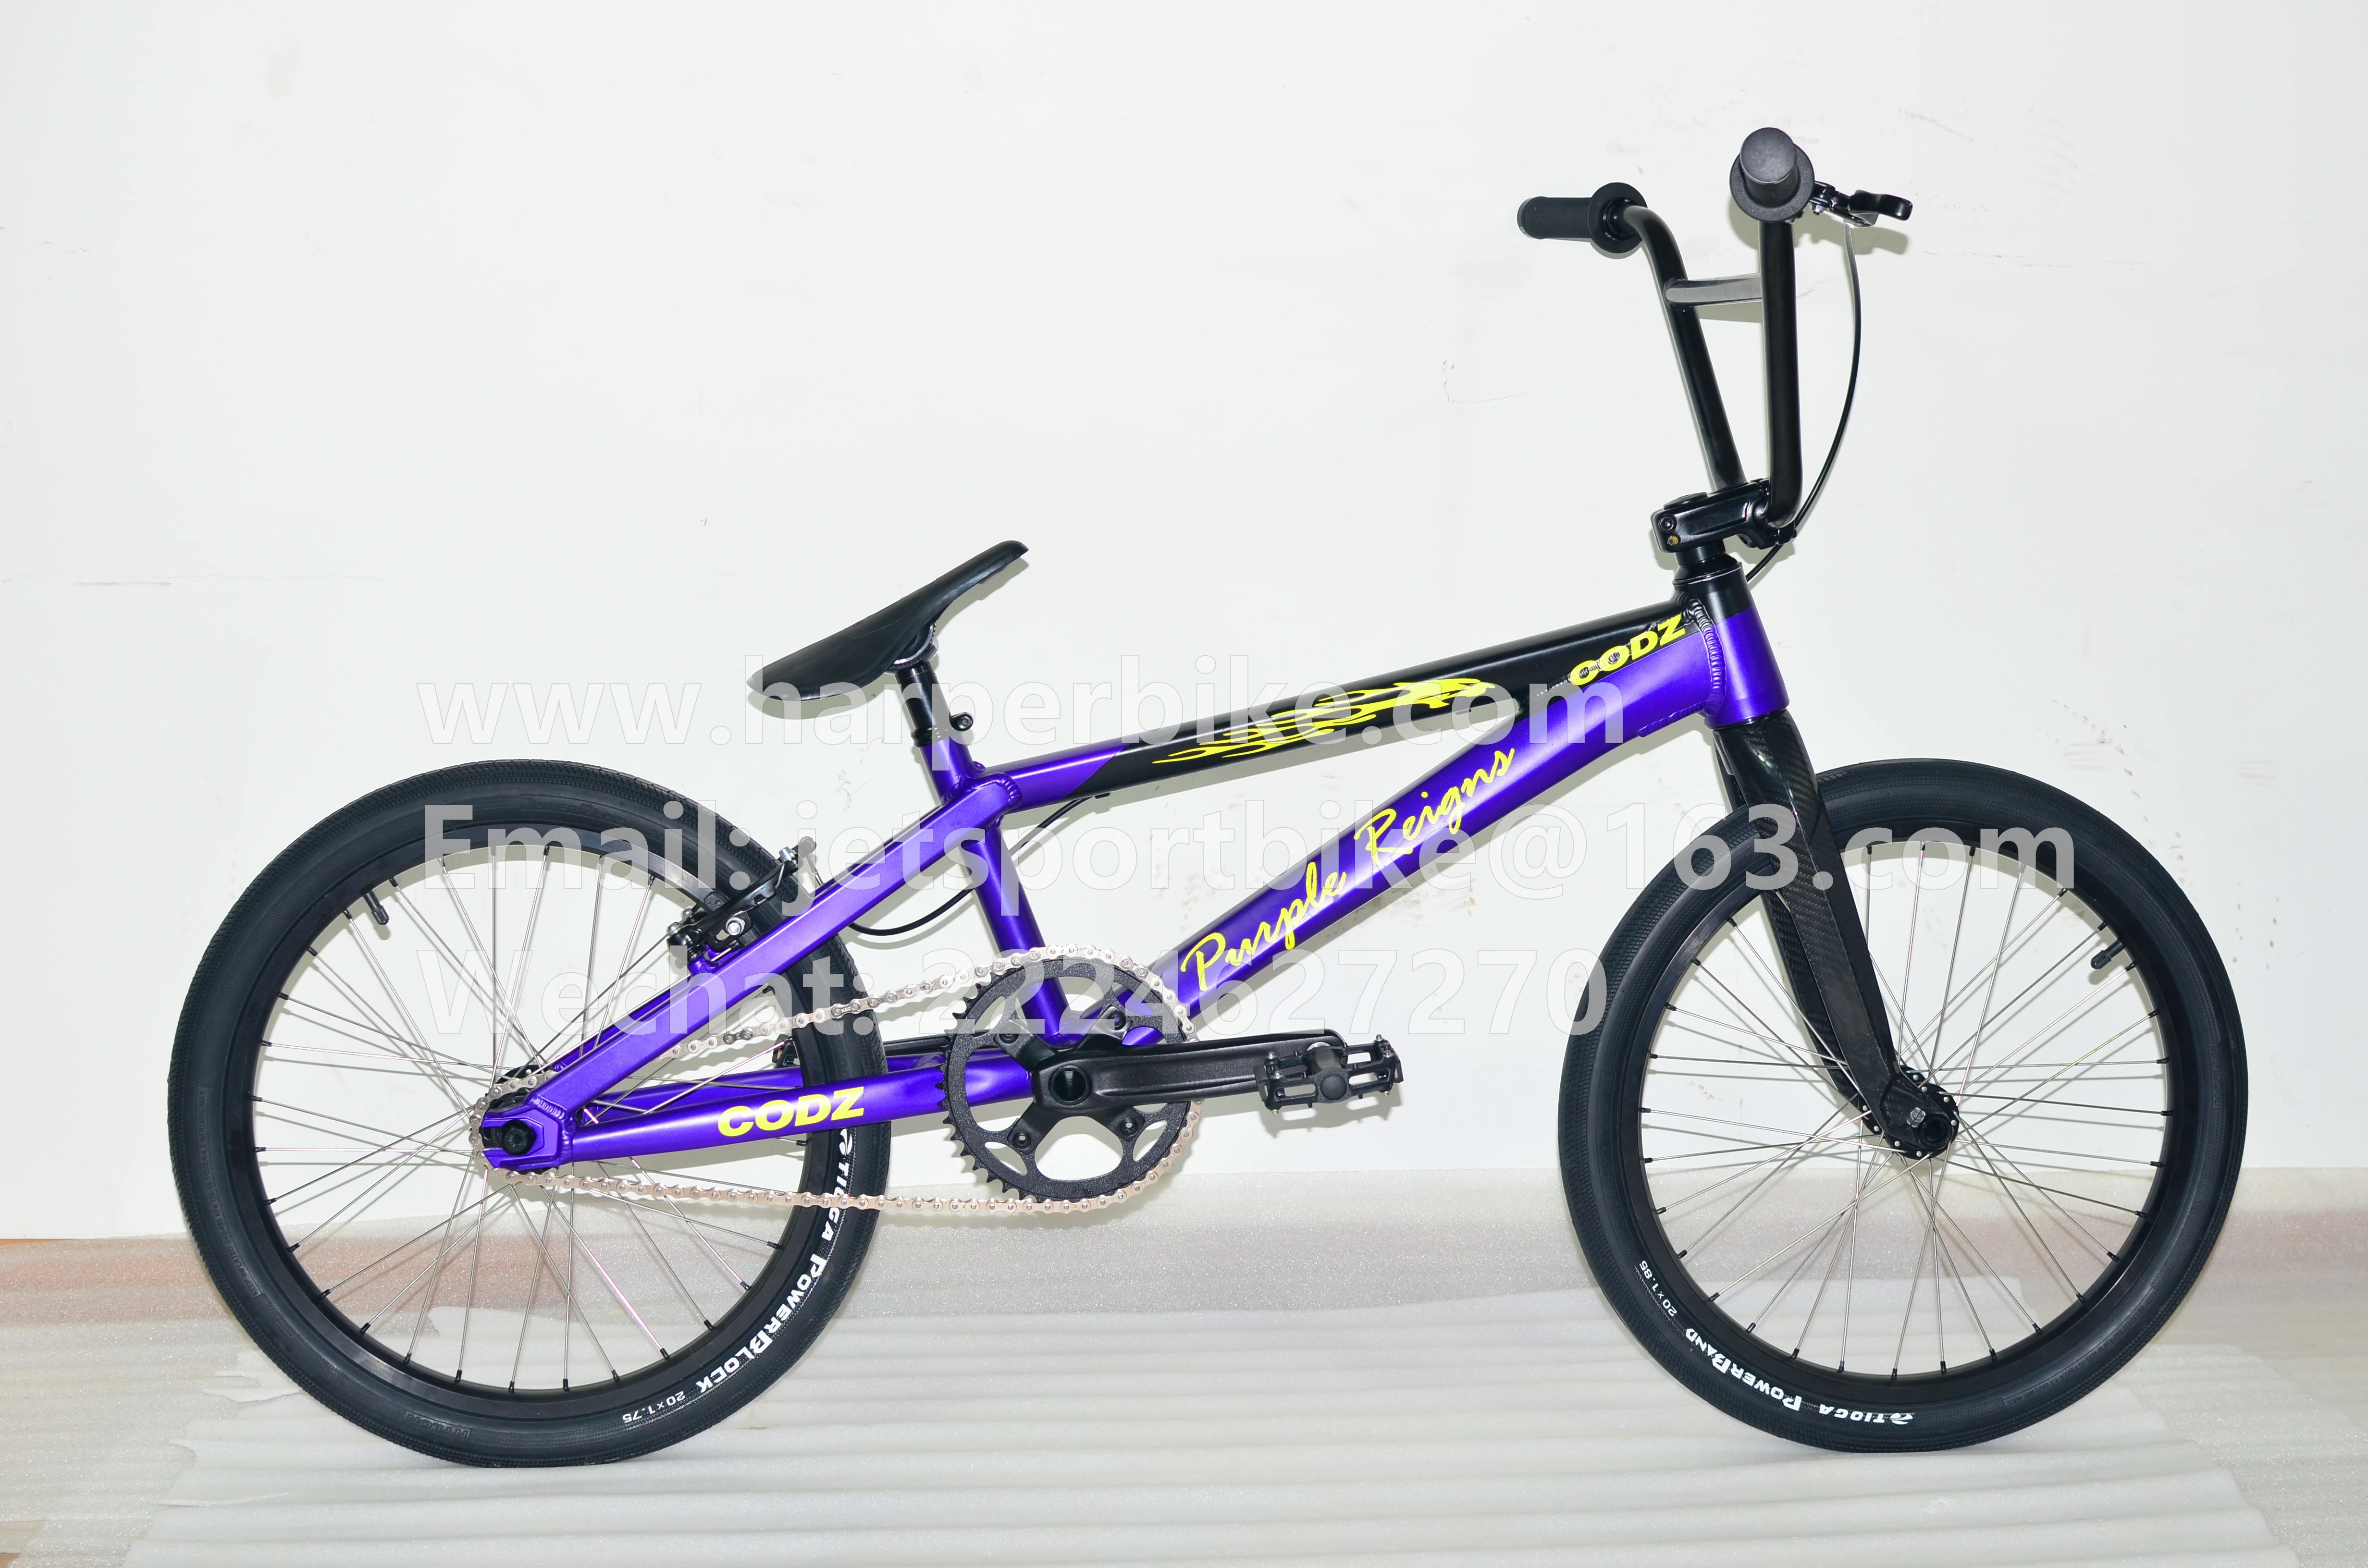 Super lightweight 20 inch BMX race bike for competition